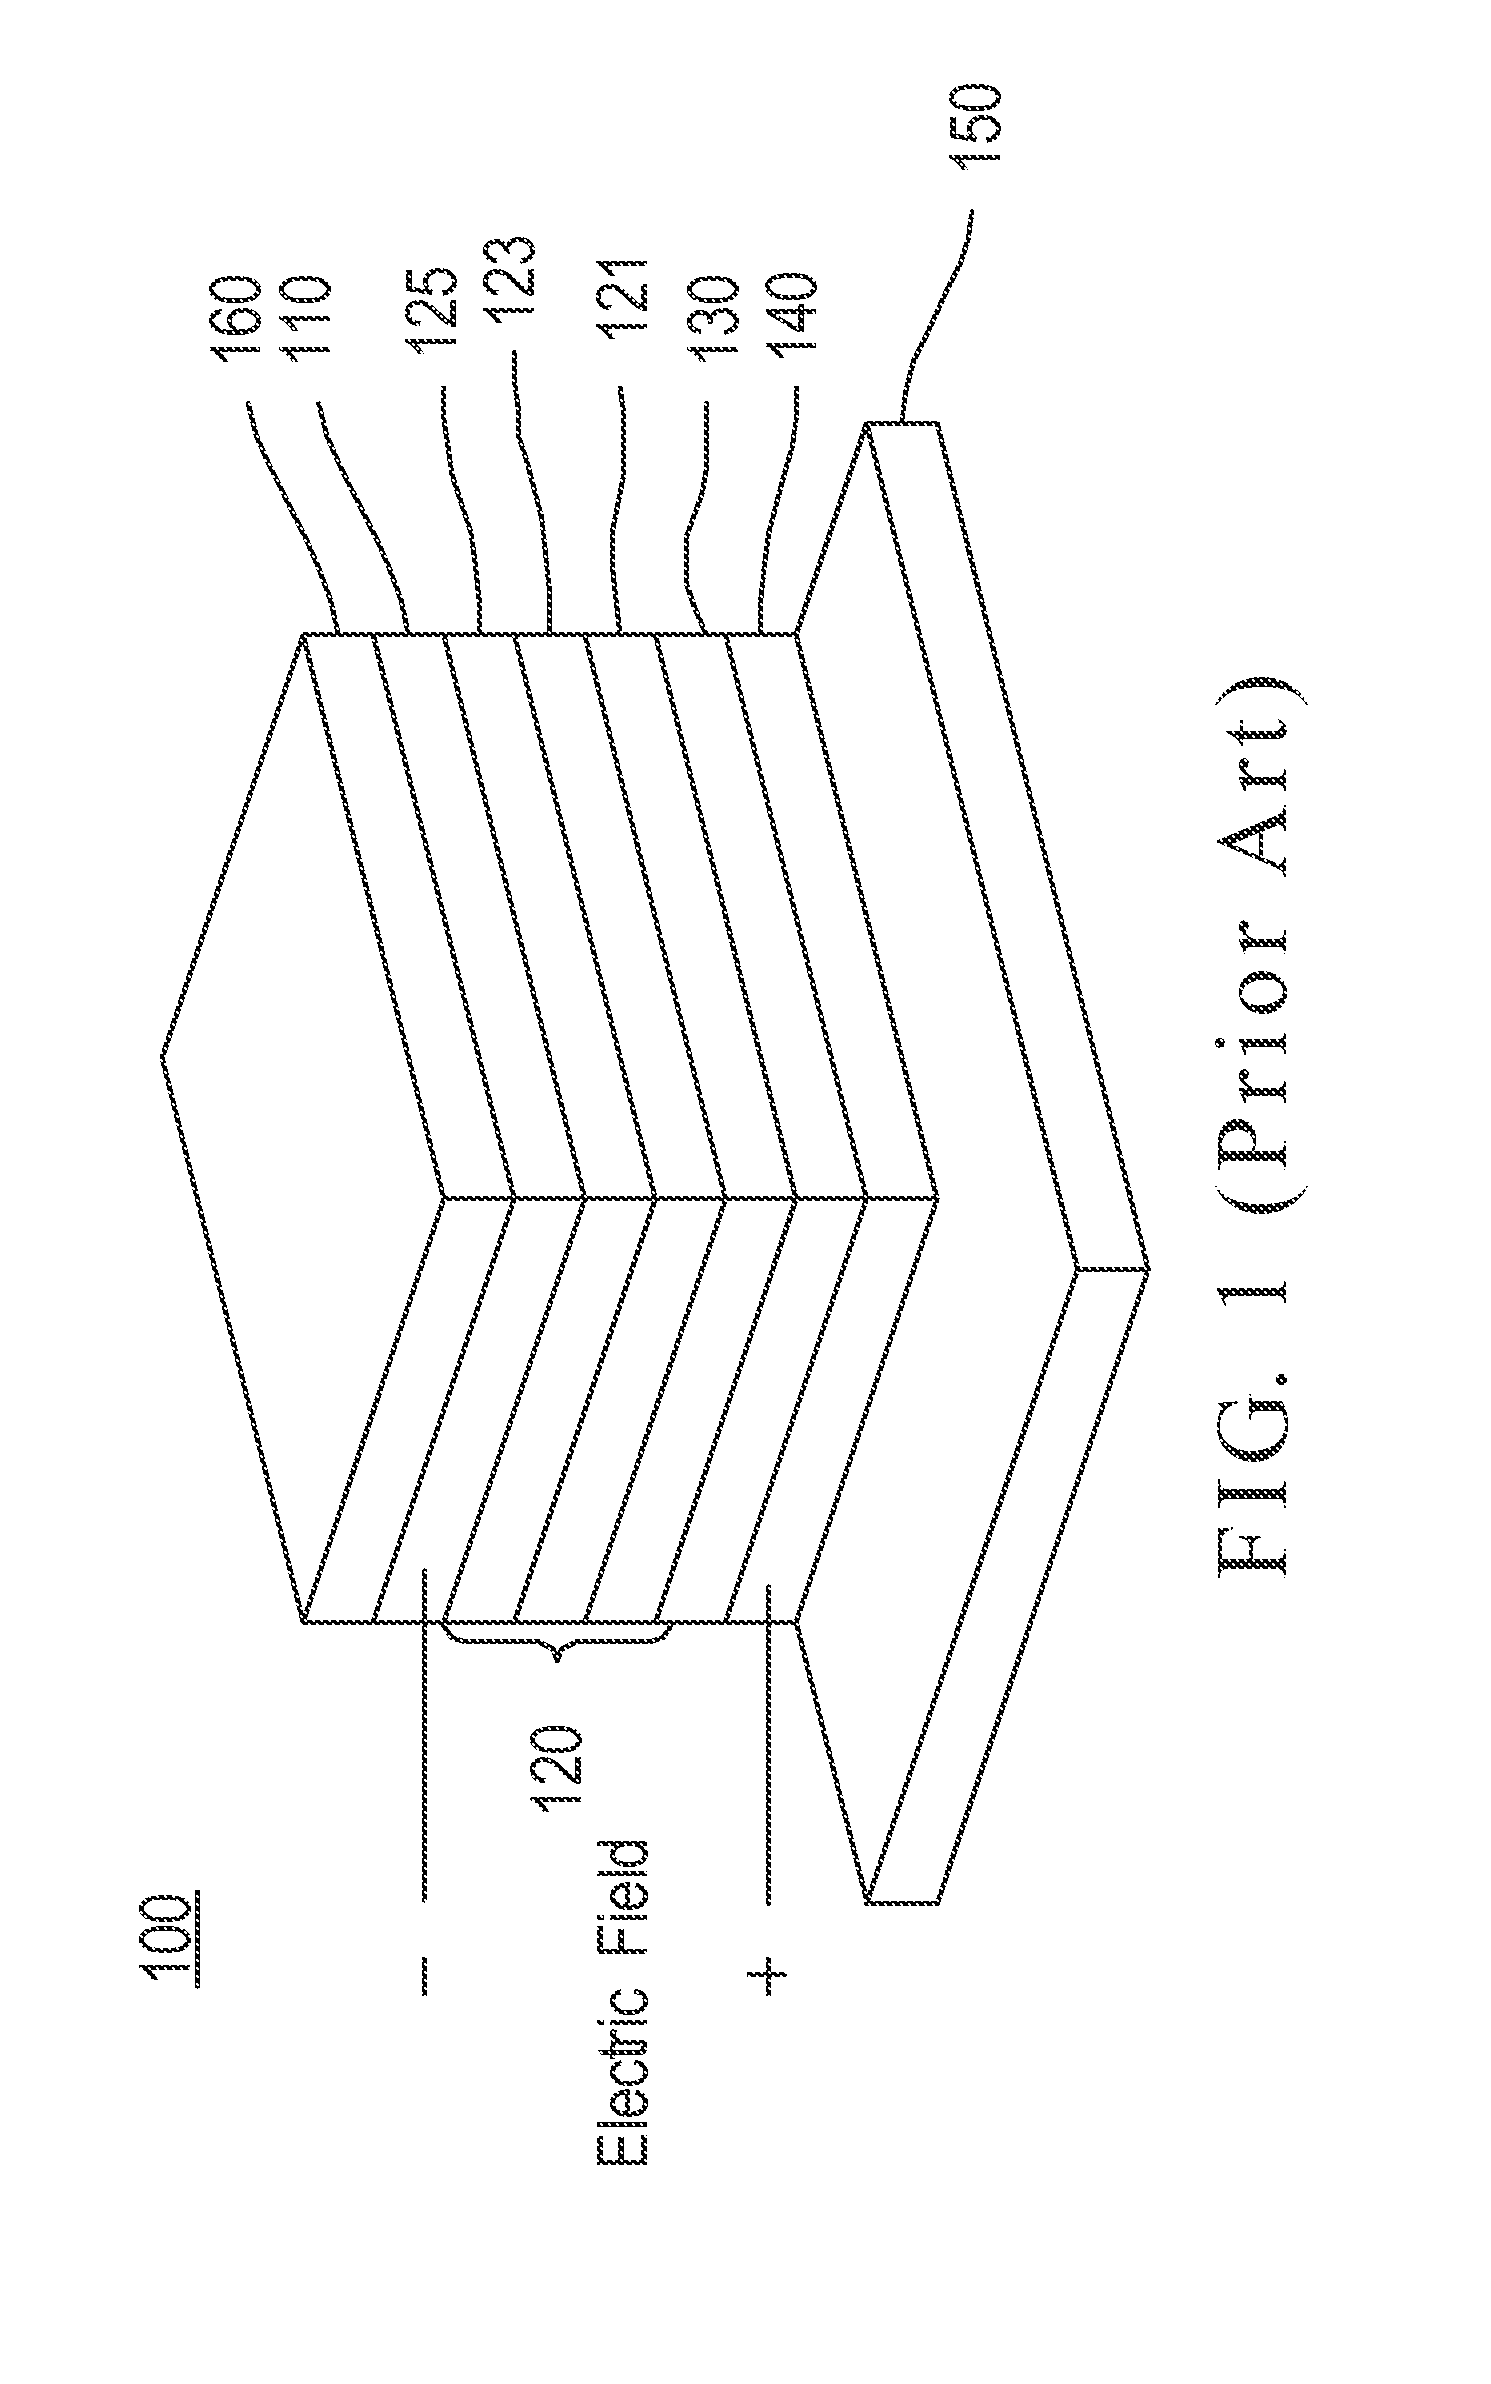 In-cell OLED touch display panel structure